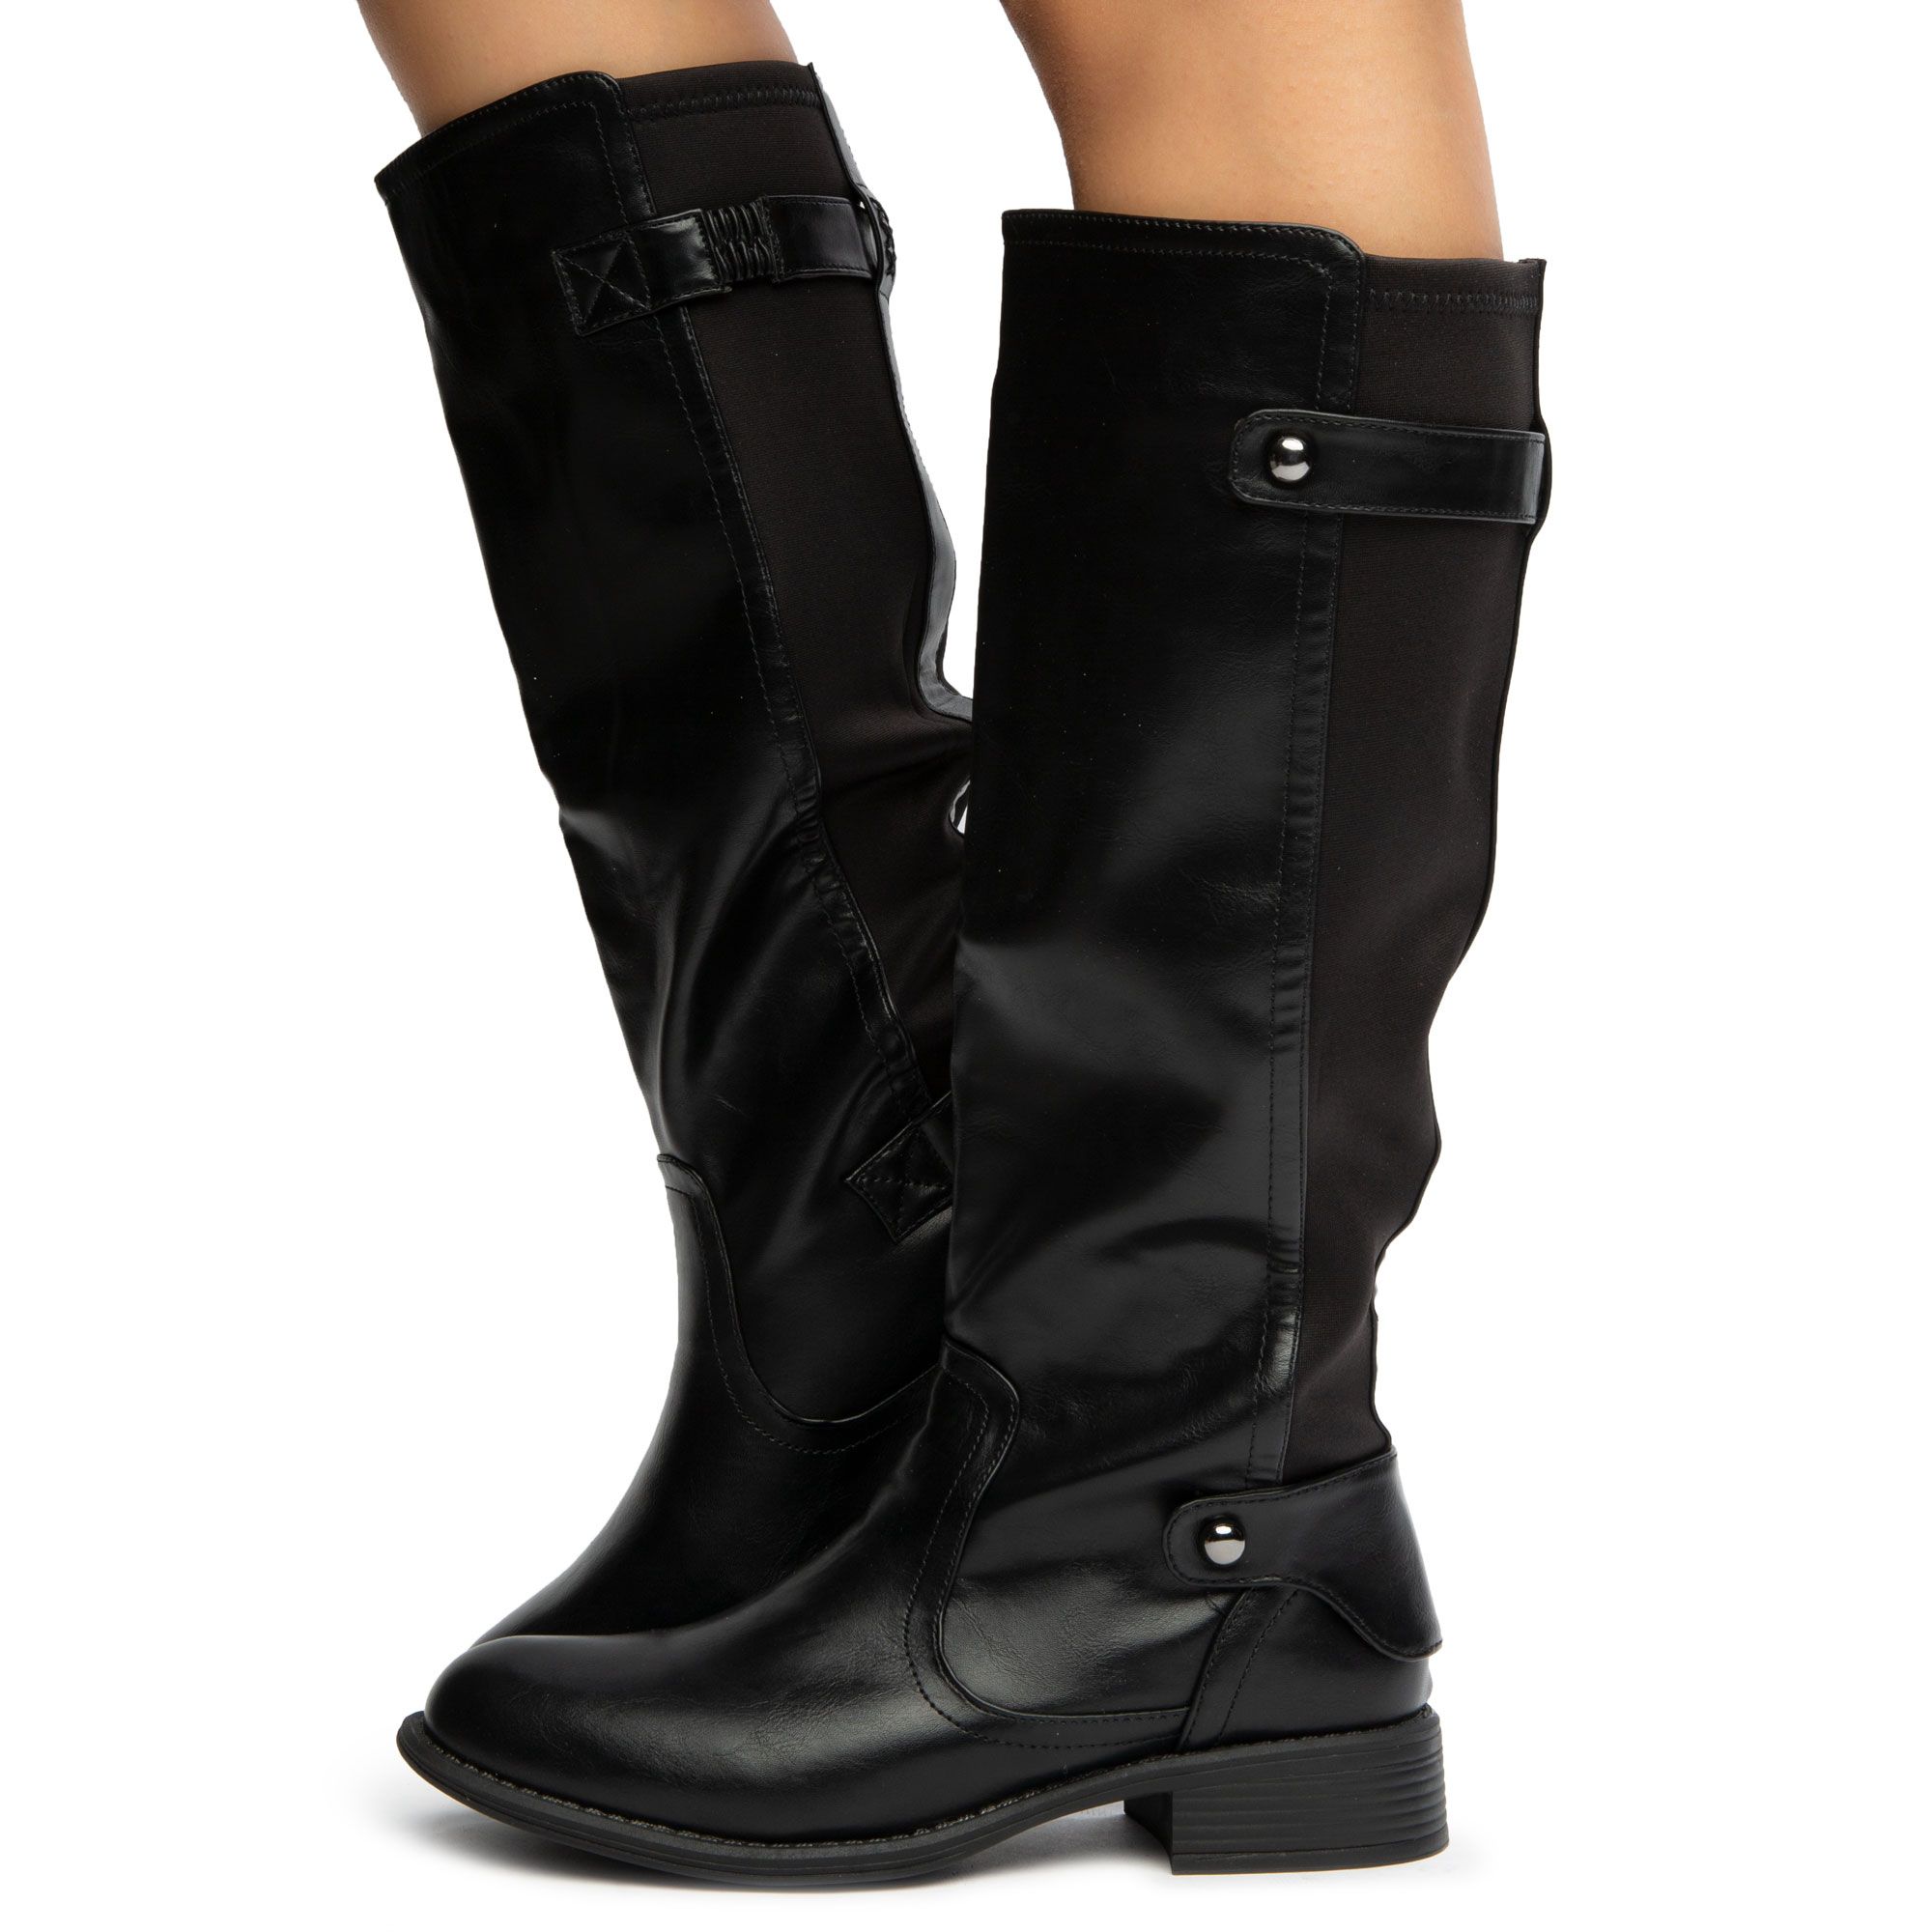 TWIN TIGER FOOTWEAR Ruthie-01 Knee High Boots RUTHIE-01KH-BLK - Shiekh